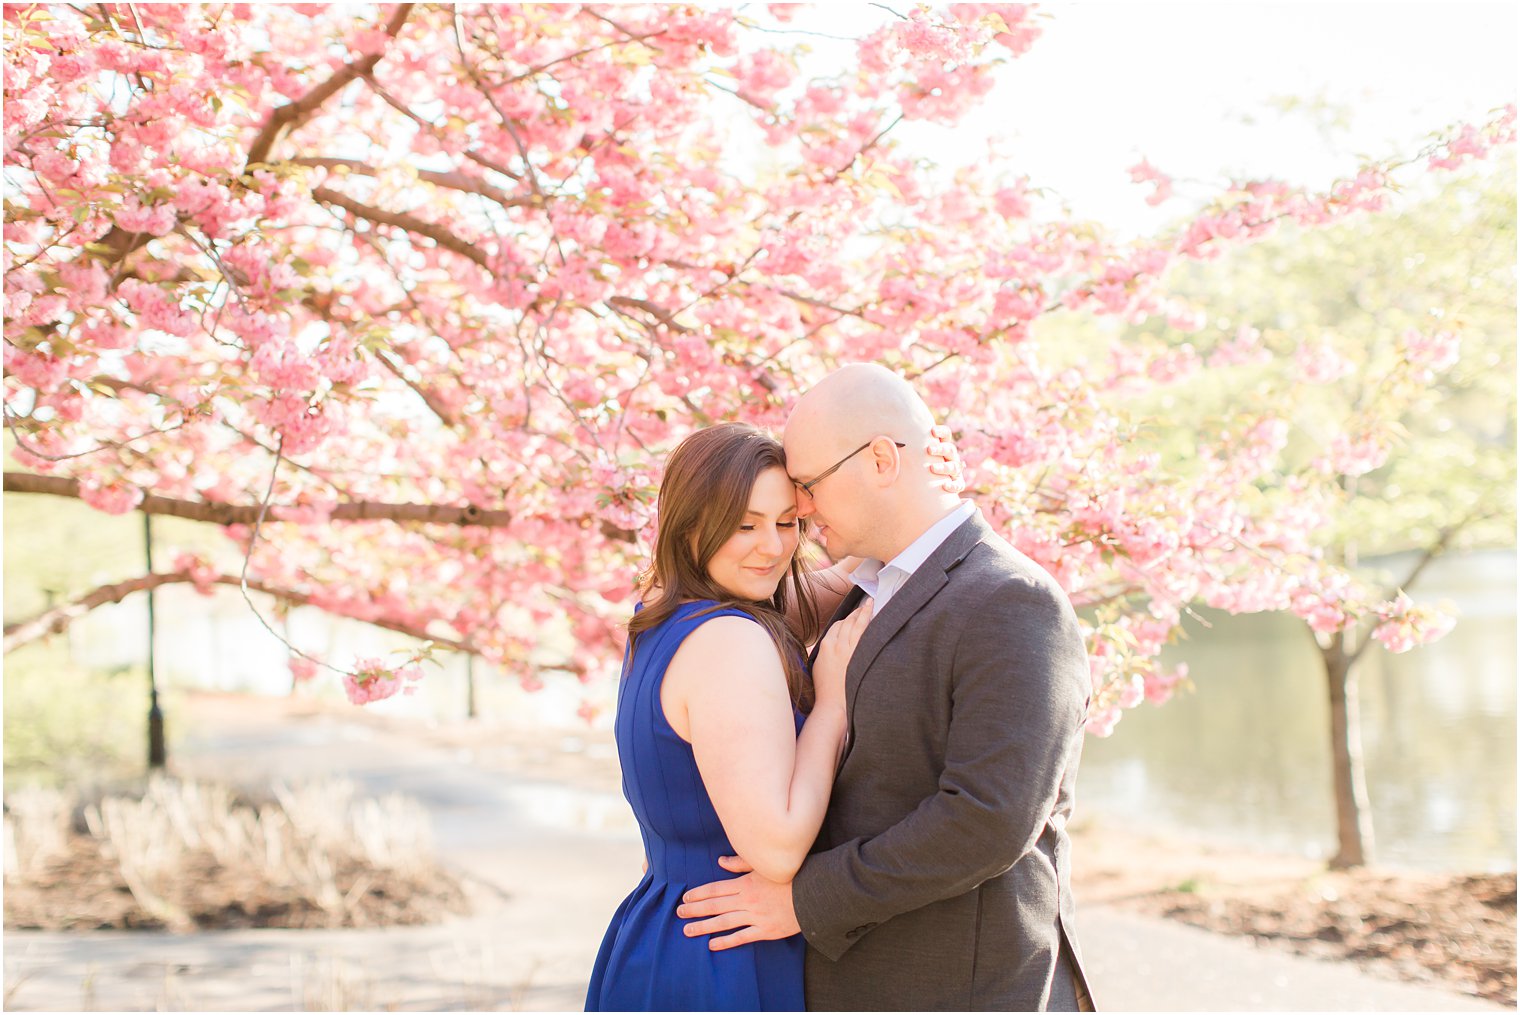 Spring Cherry Blossom Engagement in Branch Brook Park by NJ Wedding Photographers Idalia Photography.